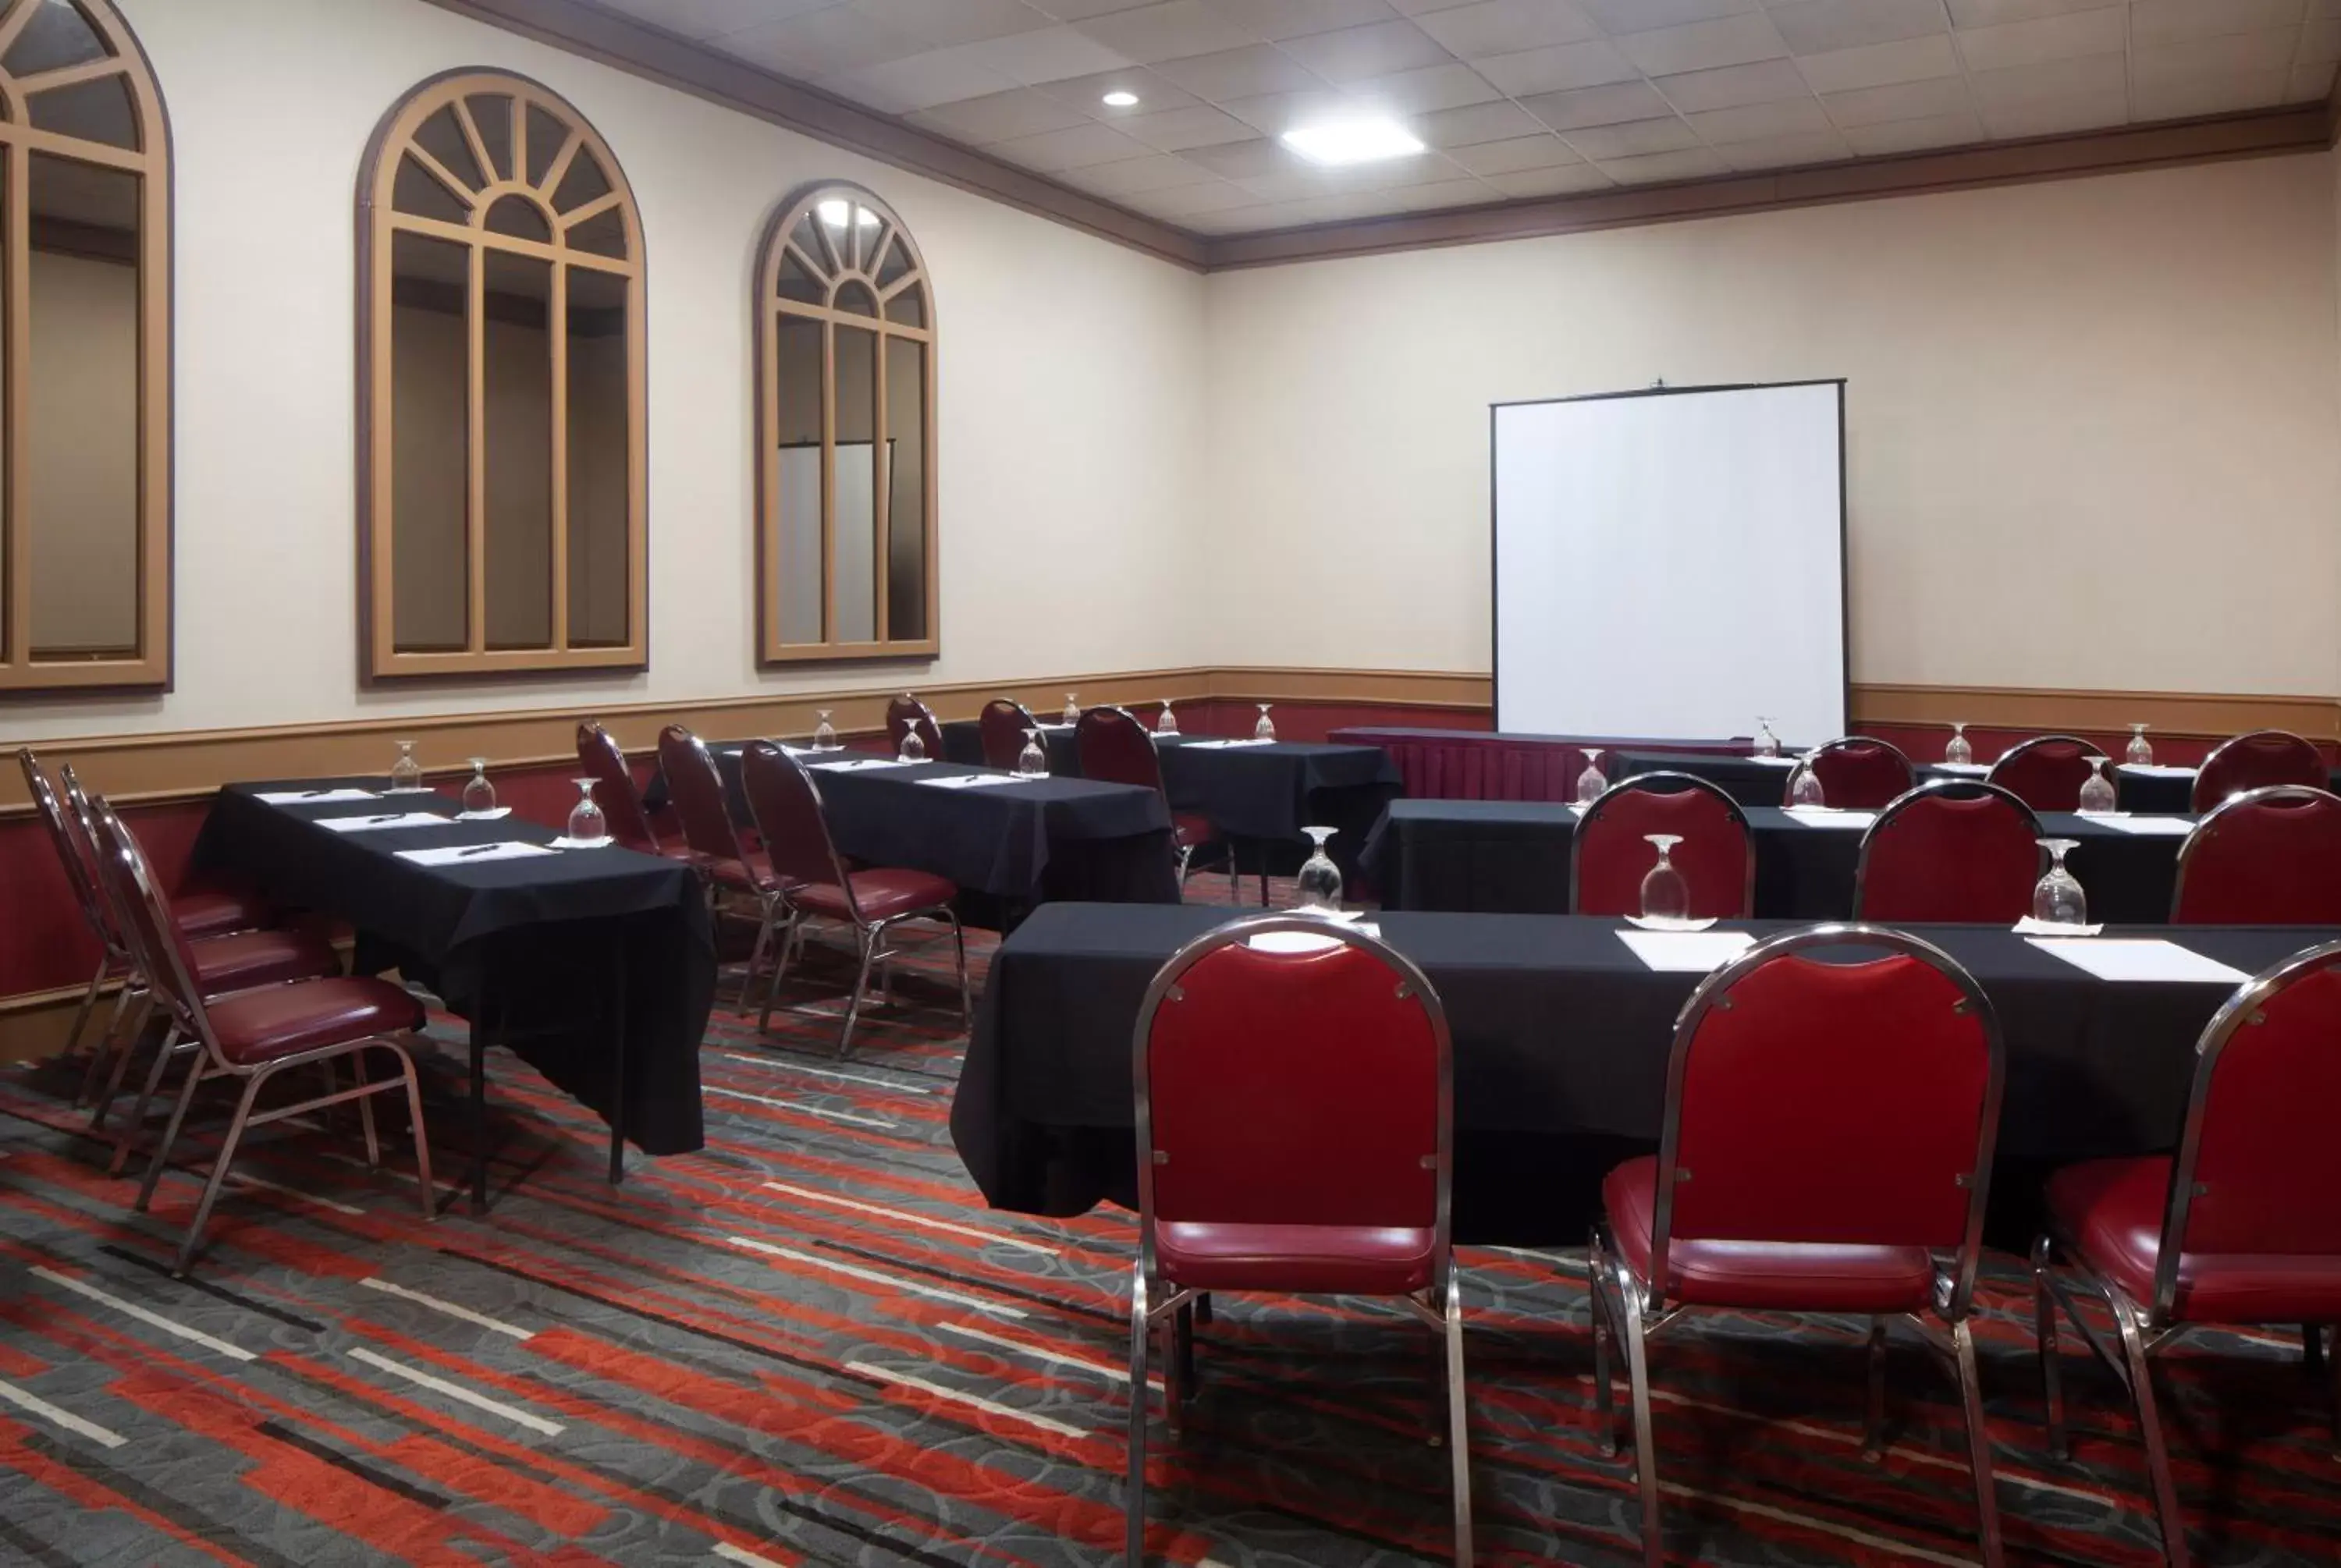 Meeting/conference room in Corpus Christi Airport and Conference Center